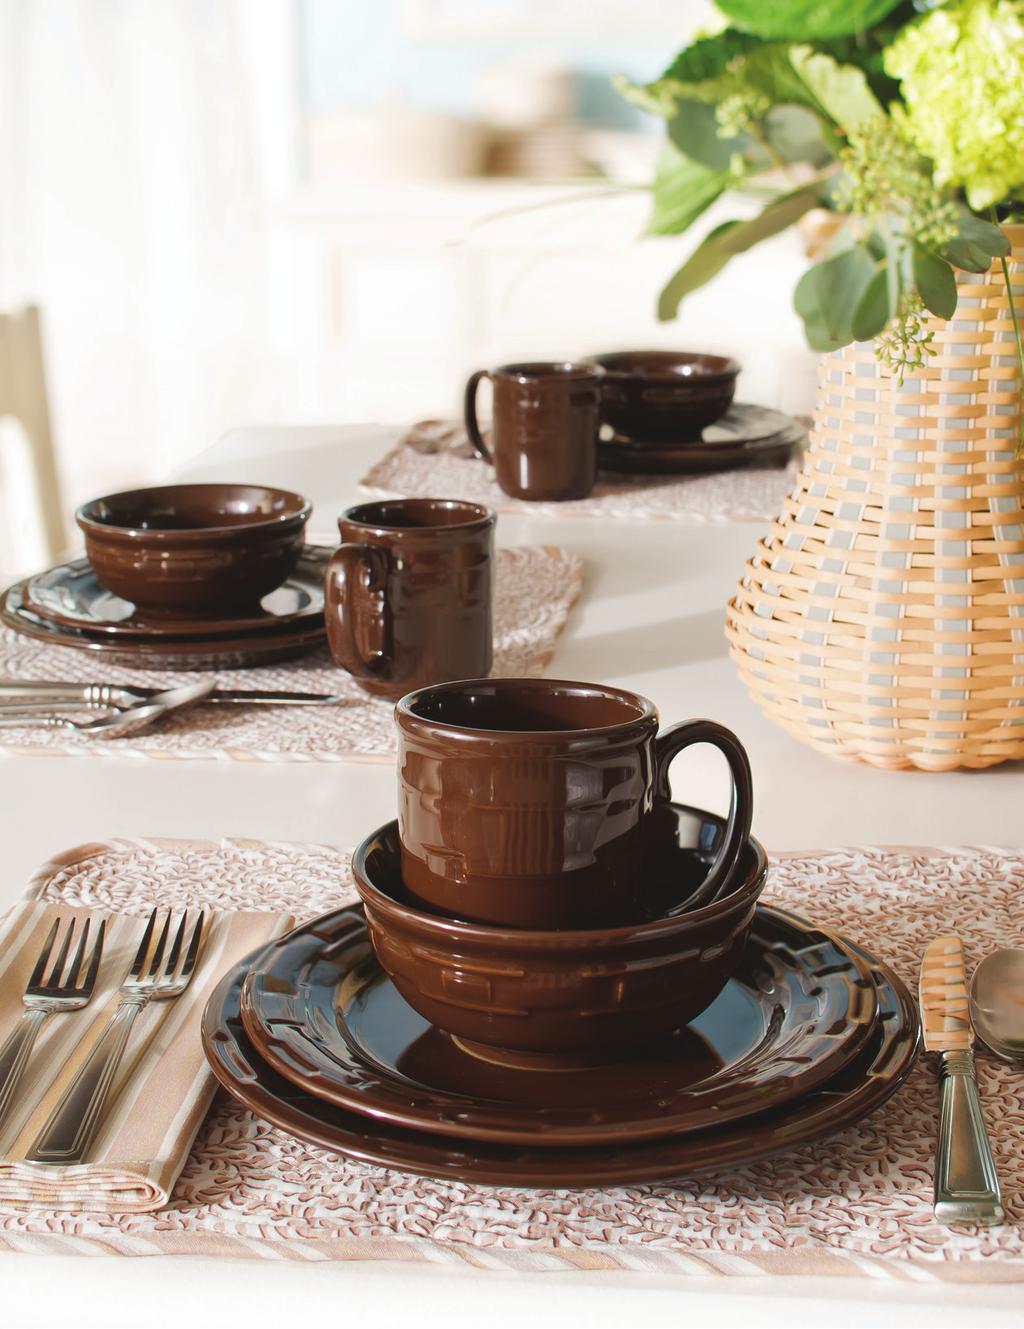 Get to know the unmatched quality of Longaberger s beautiful Woven Traditions pottery.